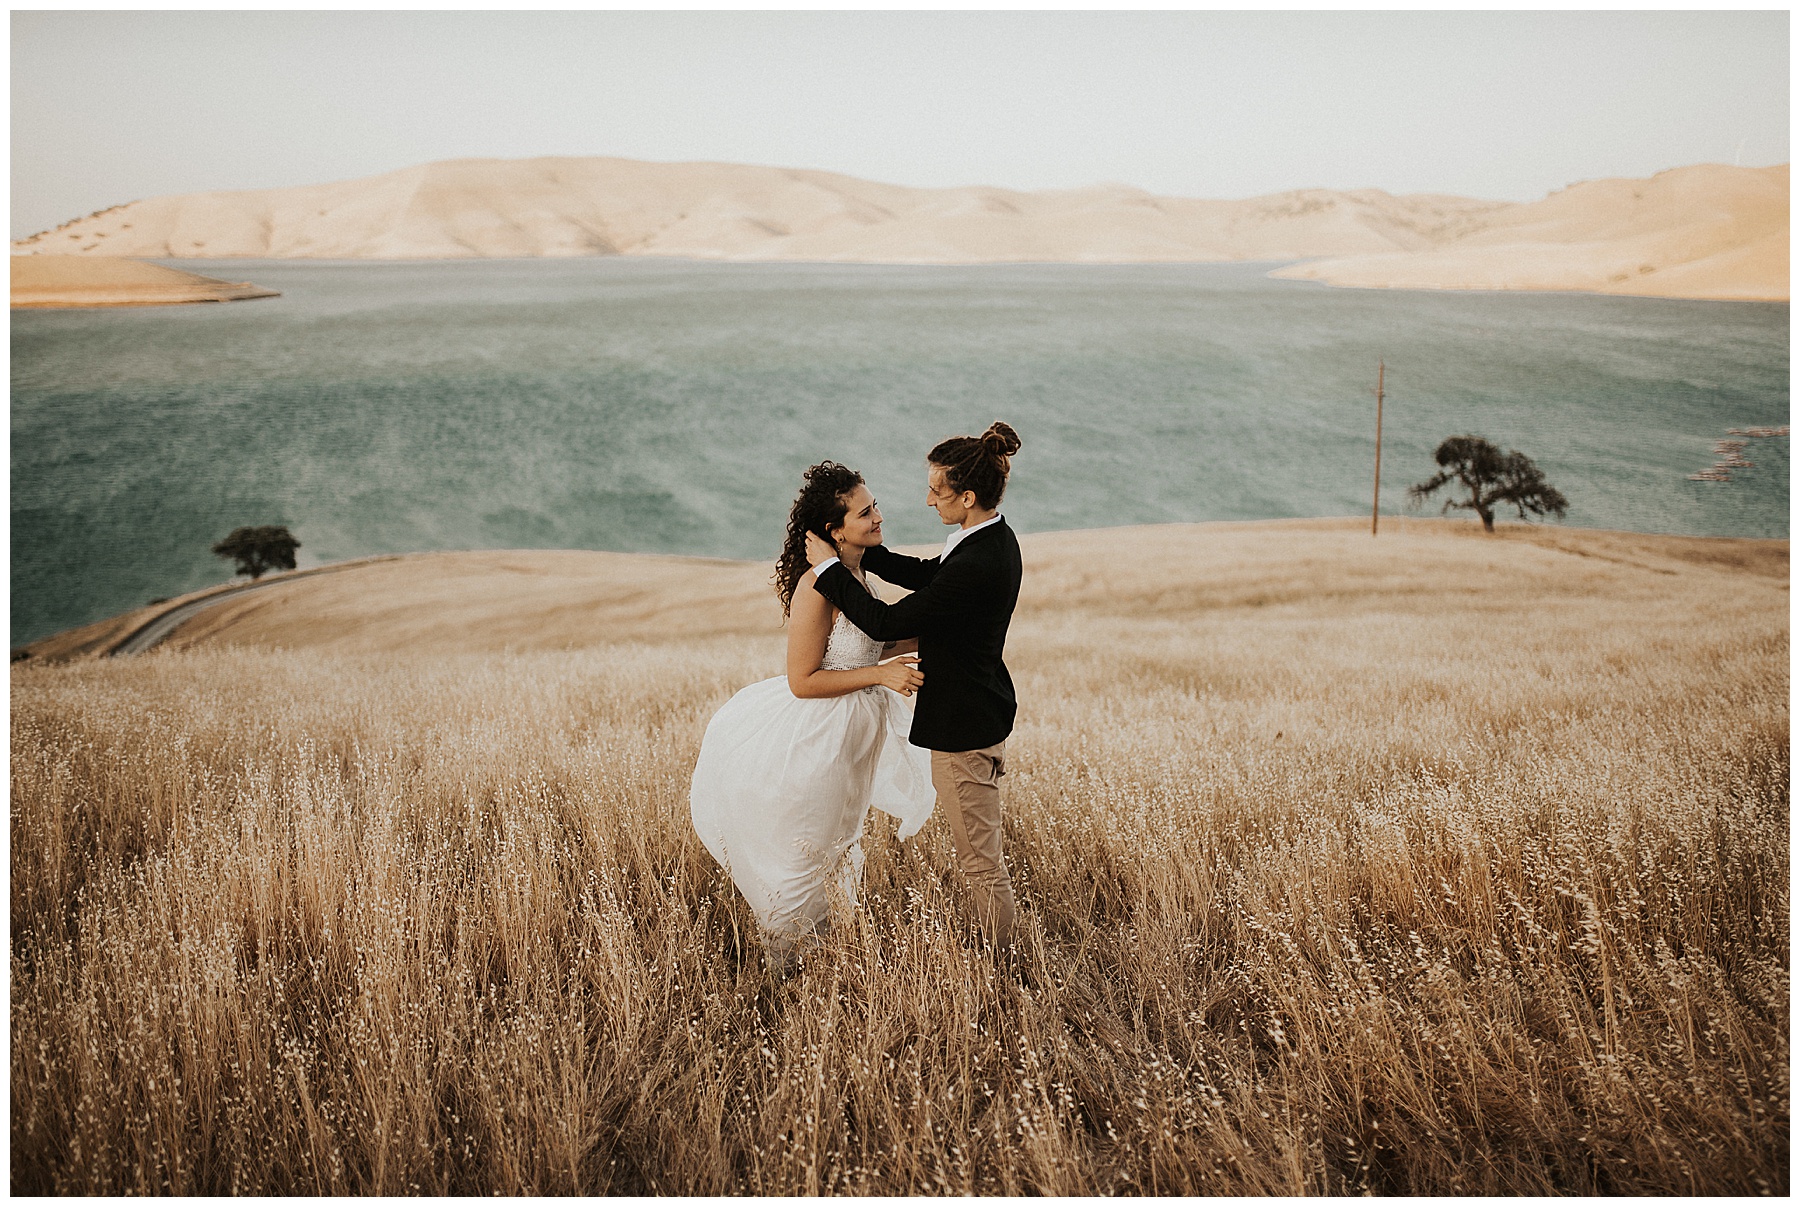 Giselle and Andre’s bohemian elopement at Los Vaqueros, California - Photographed by Juju Photography - California and destination wedding photographer